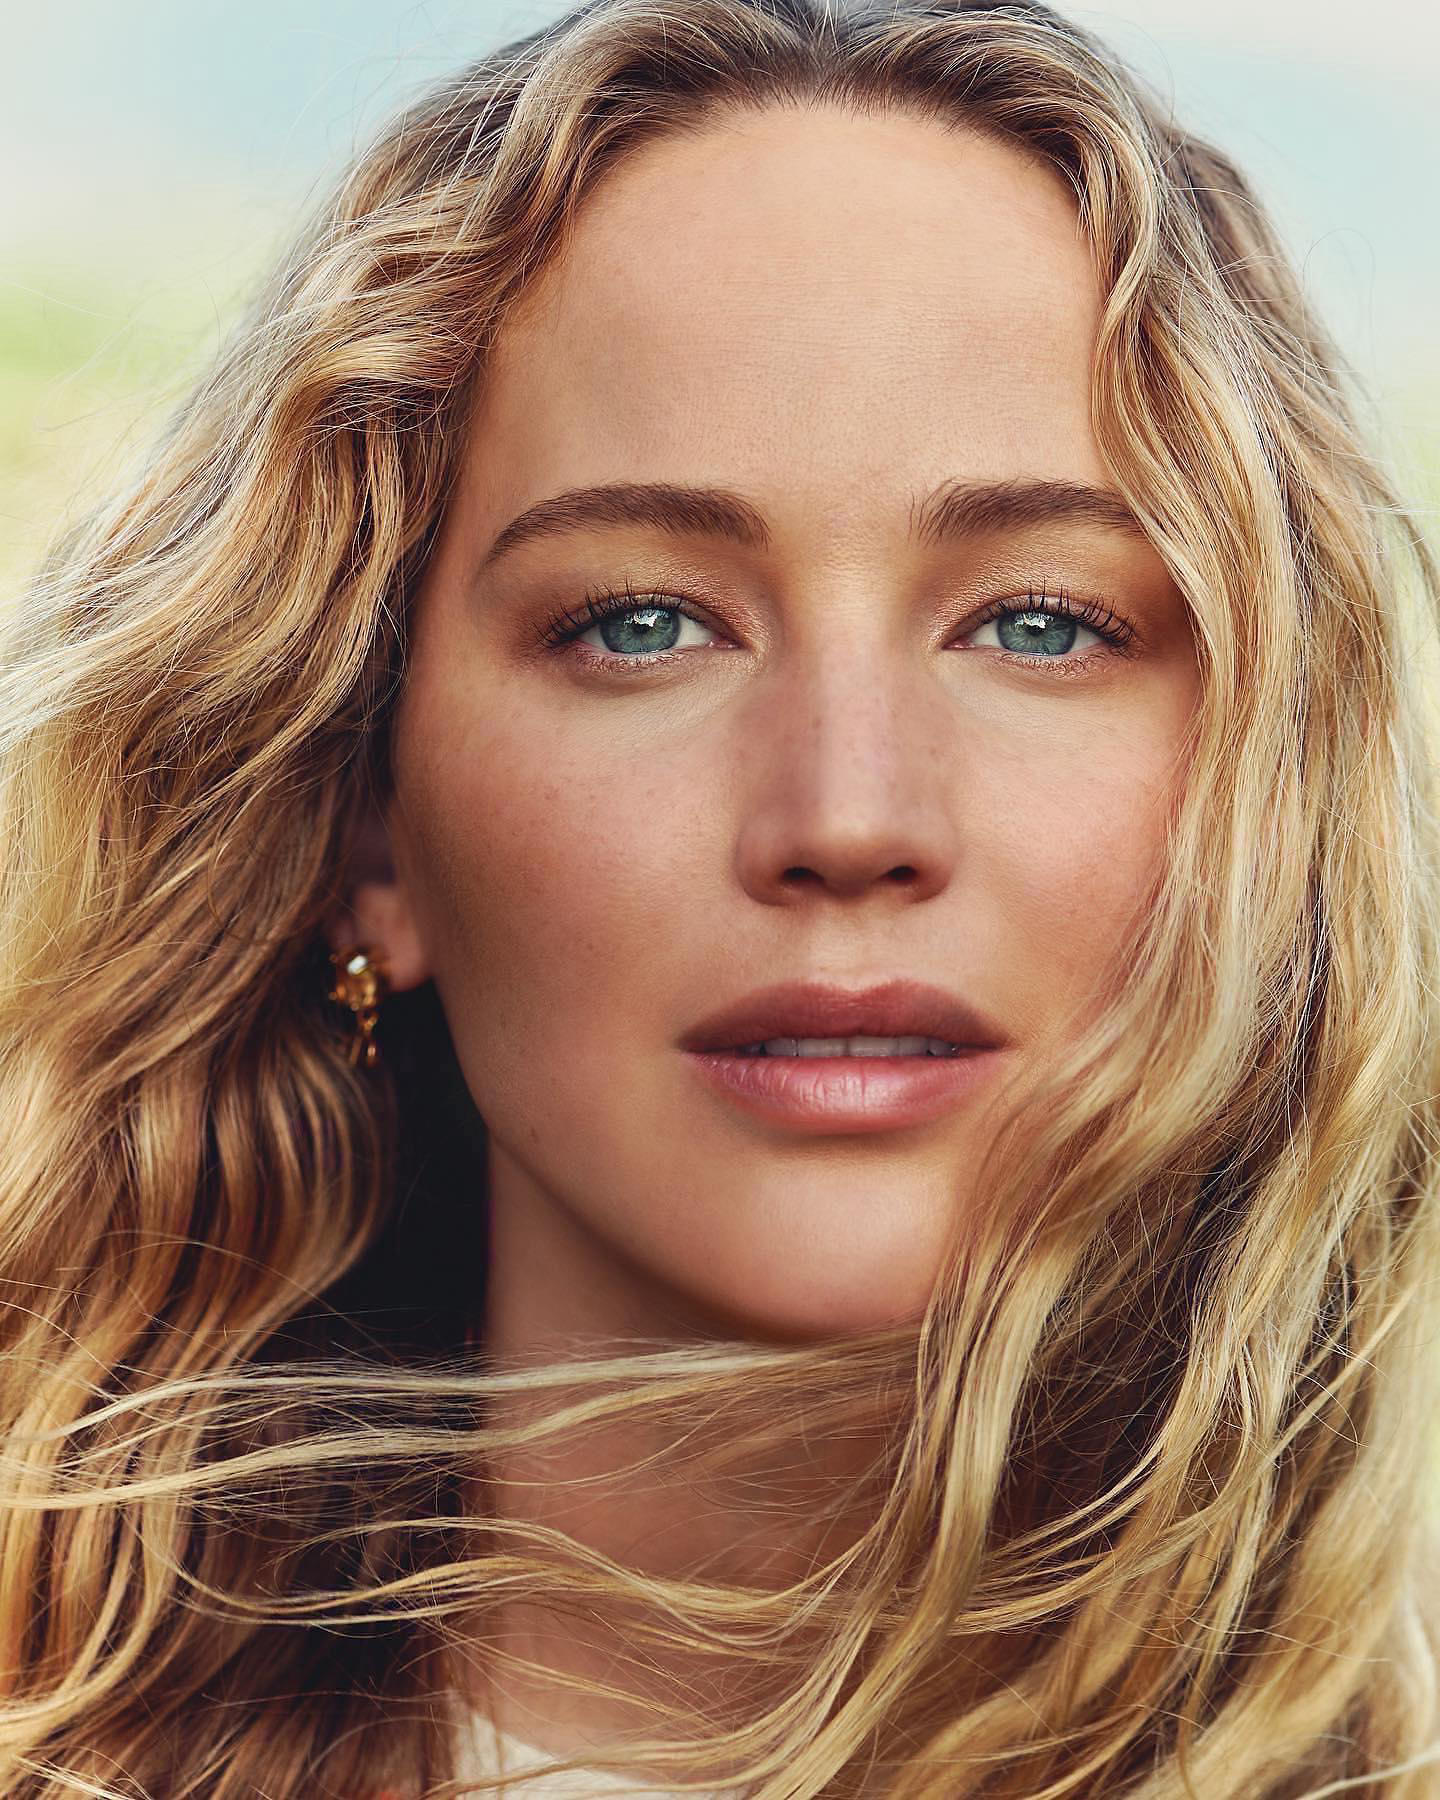 image  1 Dior Official - You too can be just as relaxed, refreshed and renewed as #JenniferLawrence after a t